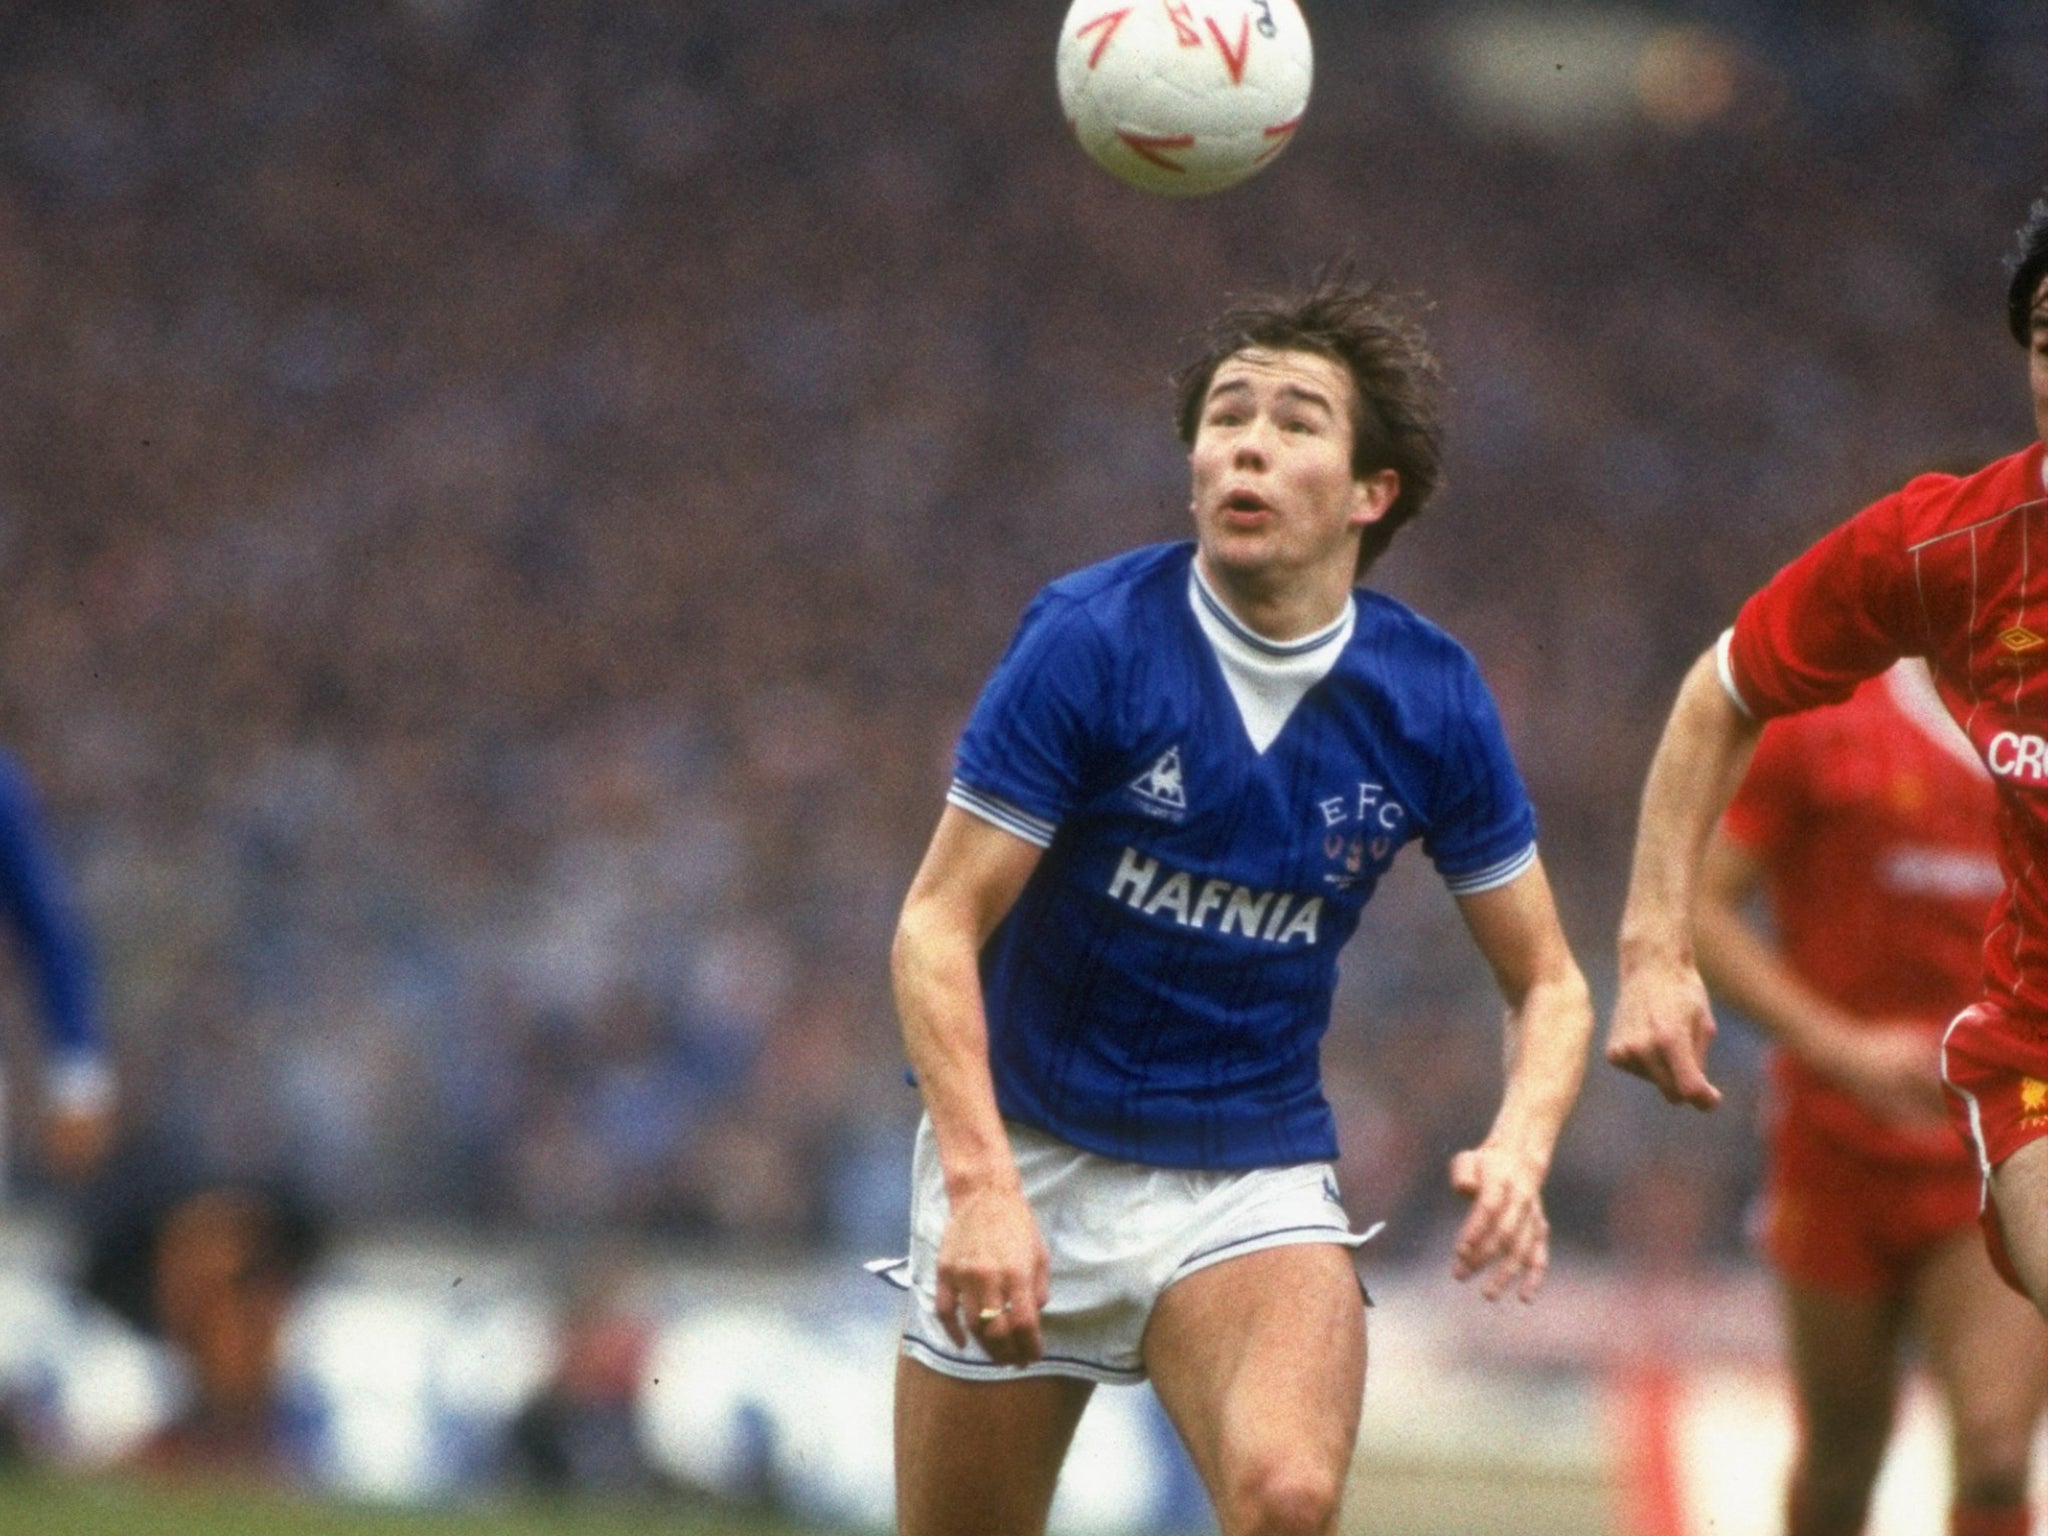 Adrian Heath of Everton in action during the Milk Cup Final against Liverpool